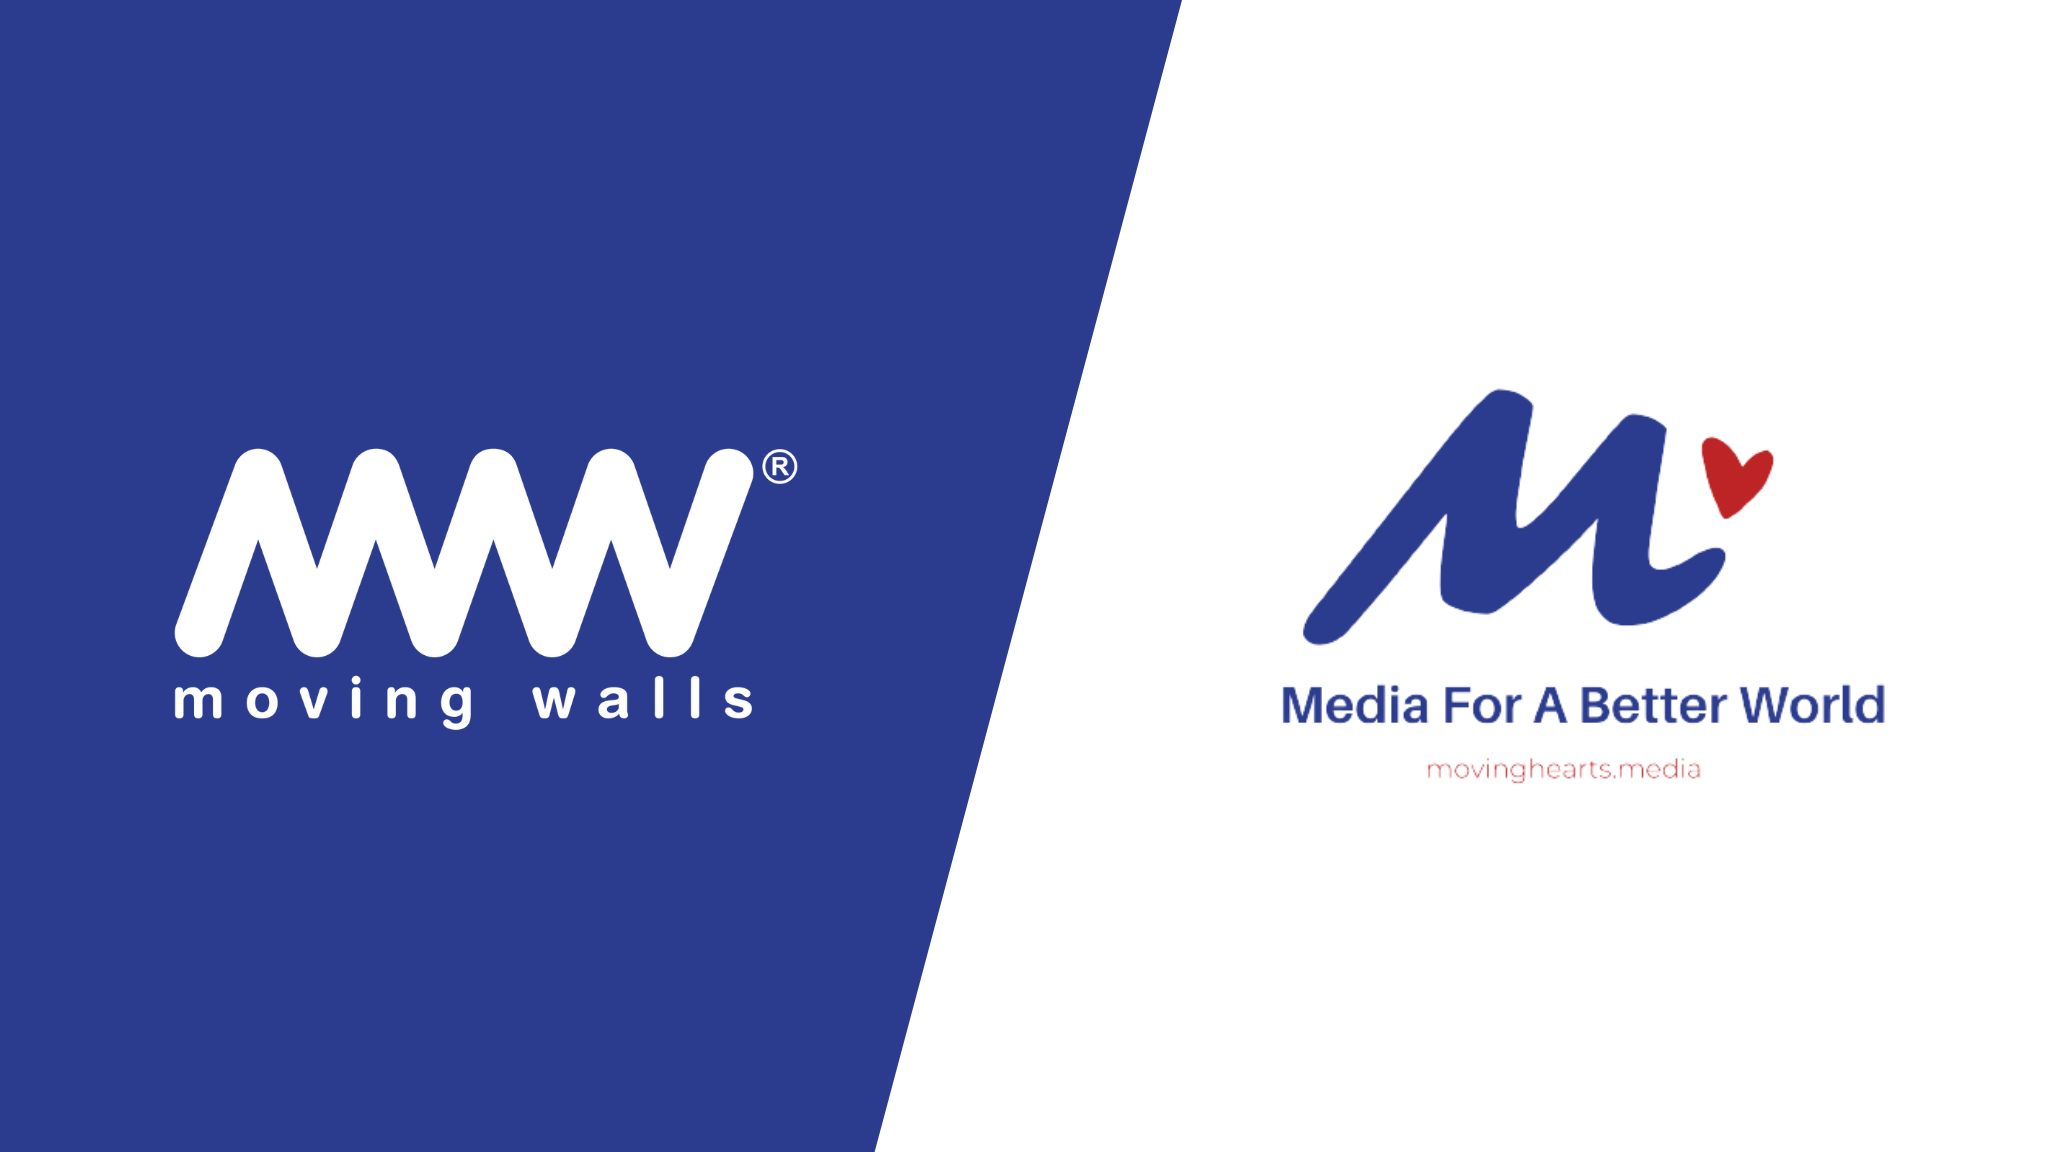 Moving Walls Launches “Moving Hearts” to Connec...